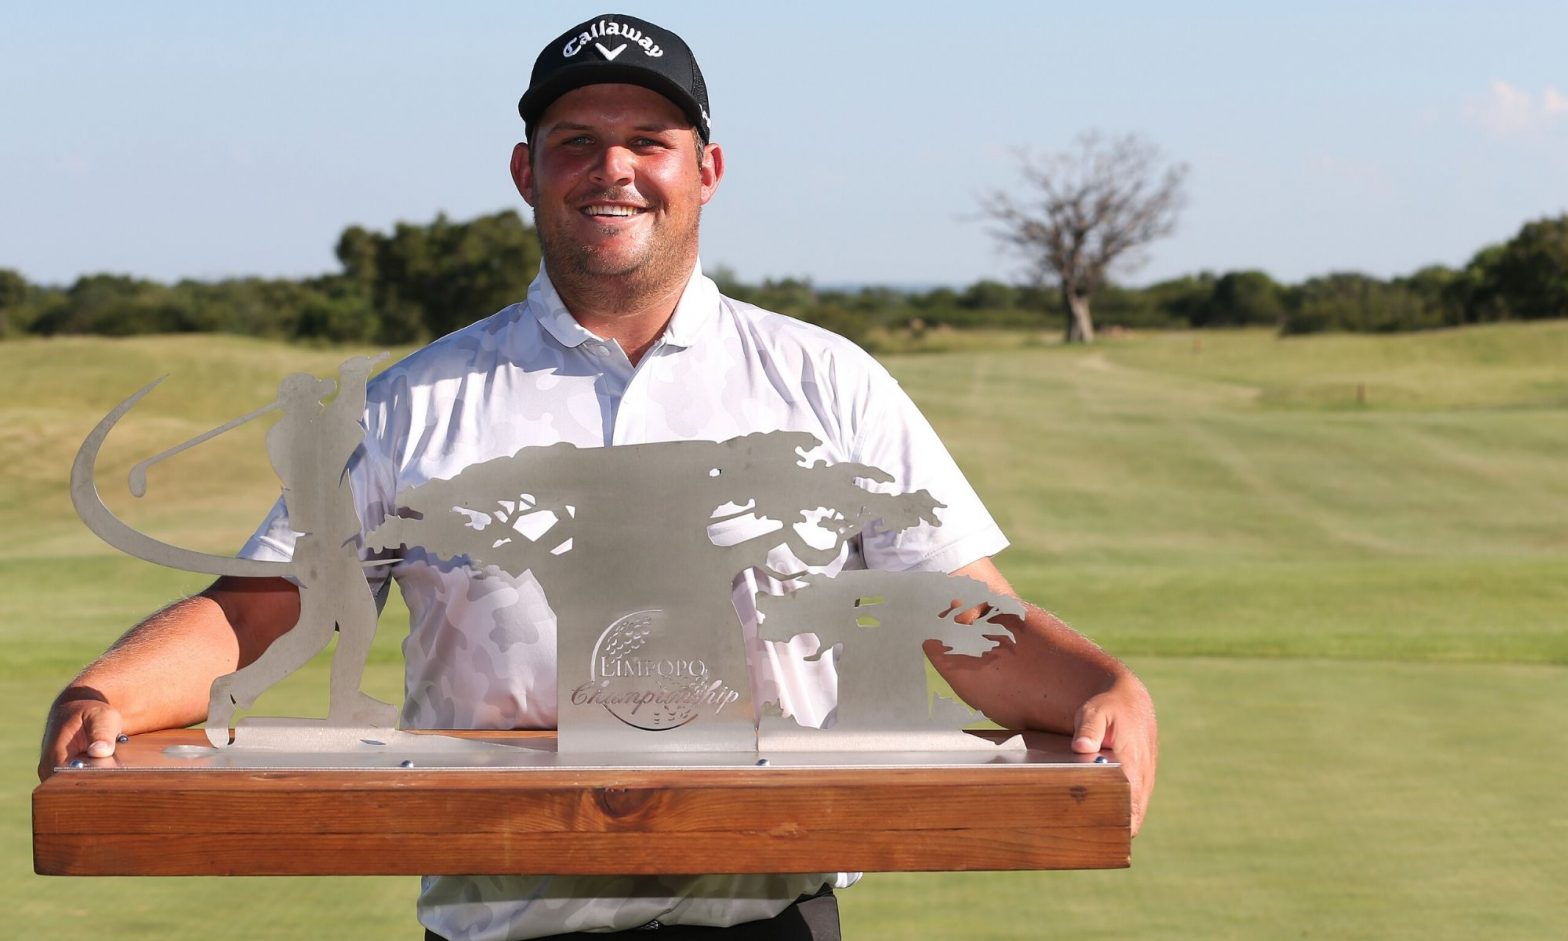 Ritchie completes a double in Limpopo Championship